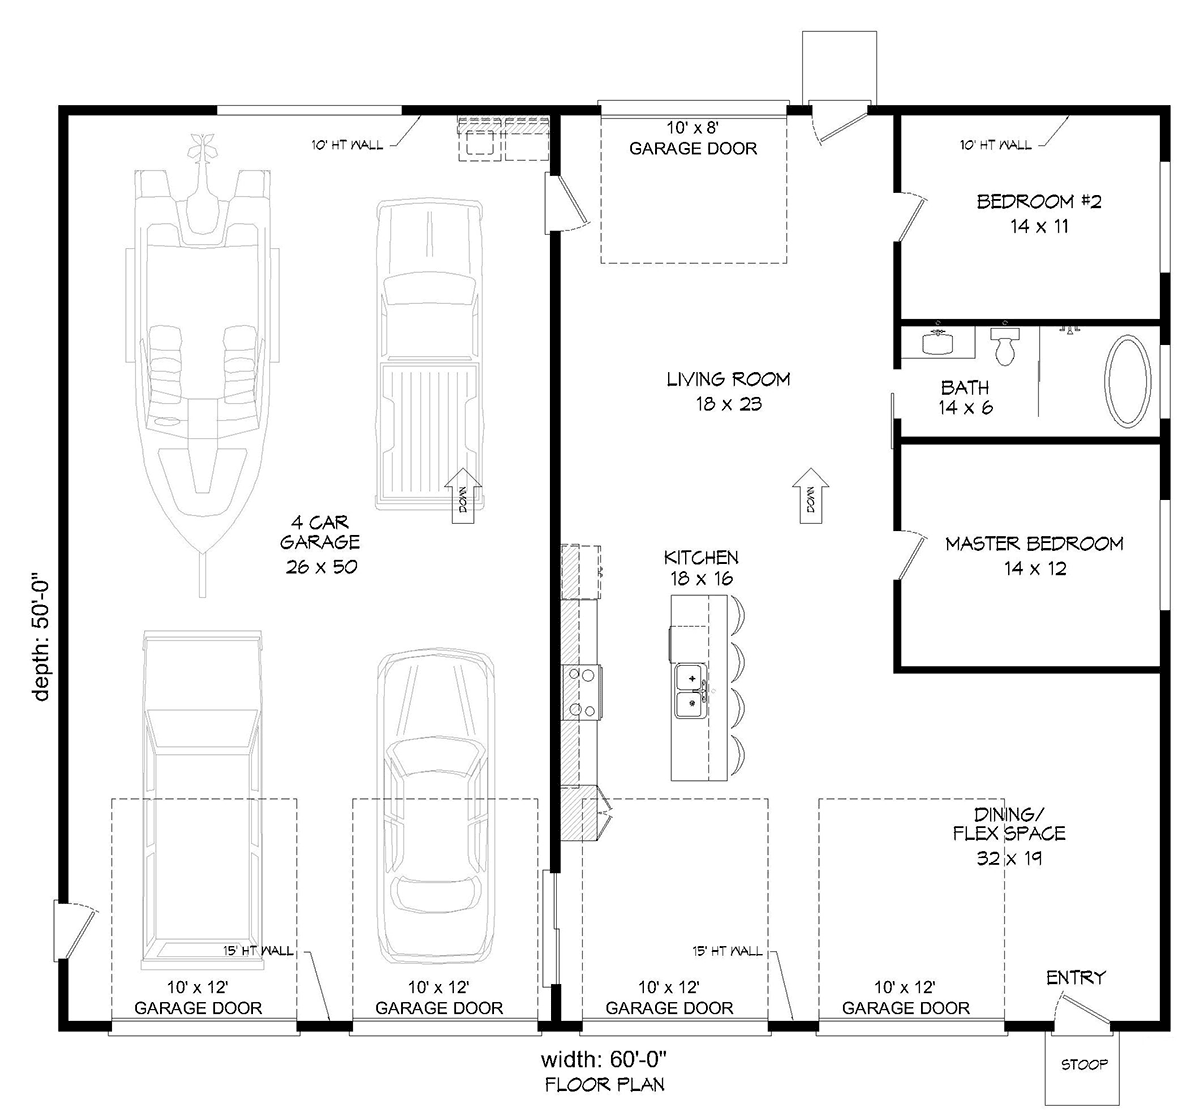 Bungalow, Contemporary, Craftsman Garage-Living Plan 52141 with 2 Beds, 1 Baths, 3 Car Garage Level One